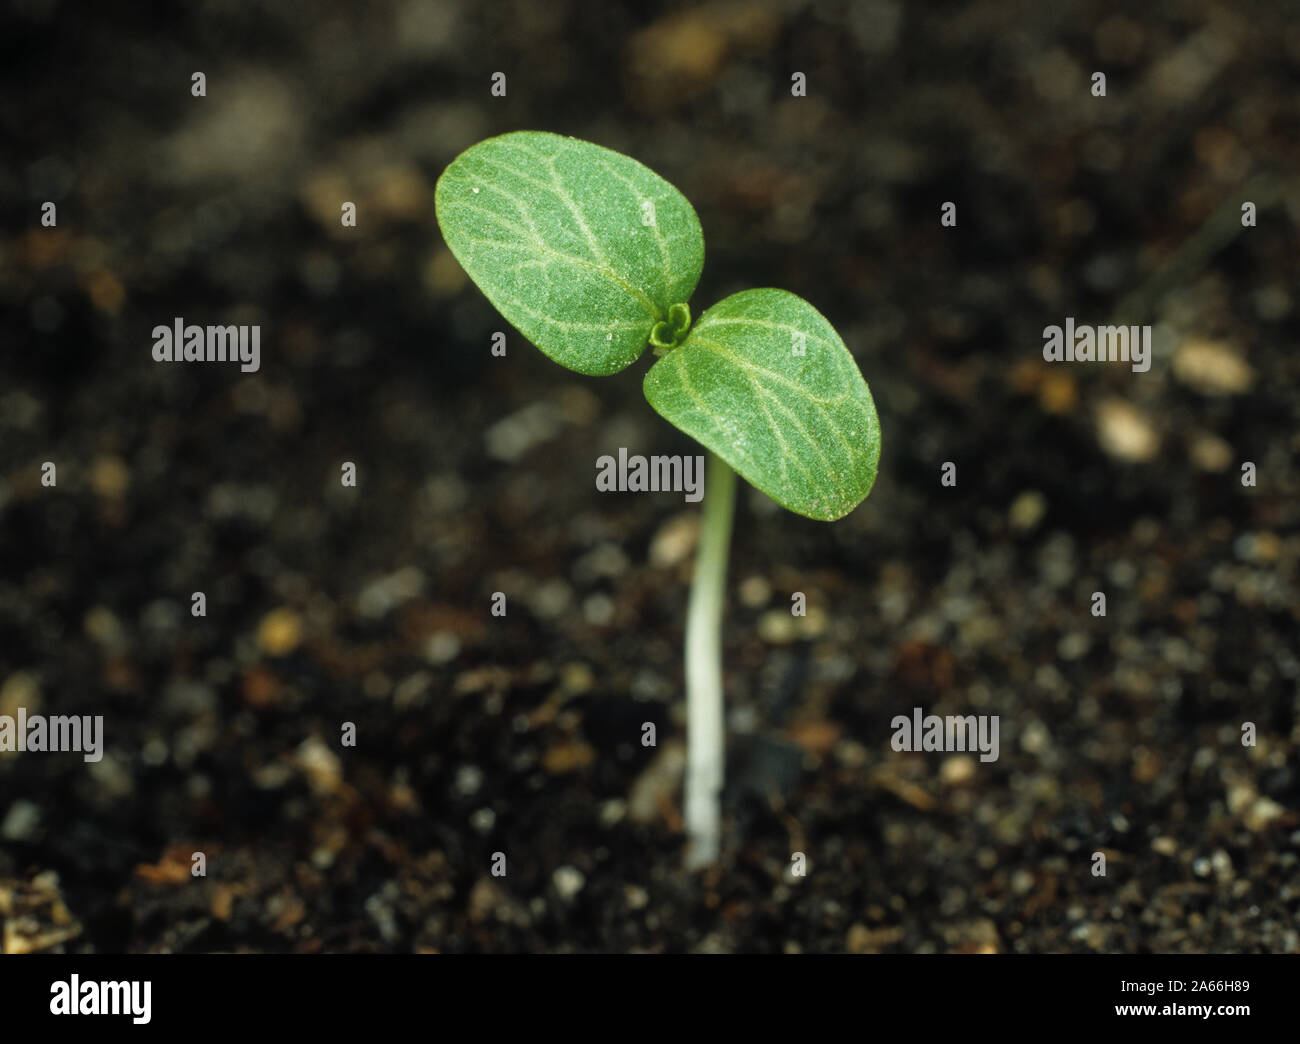 Annual mercury (Mercurialis annua) seedling plant with cotyledon leaves only against a soil background Stock Photo